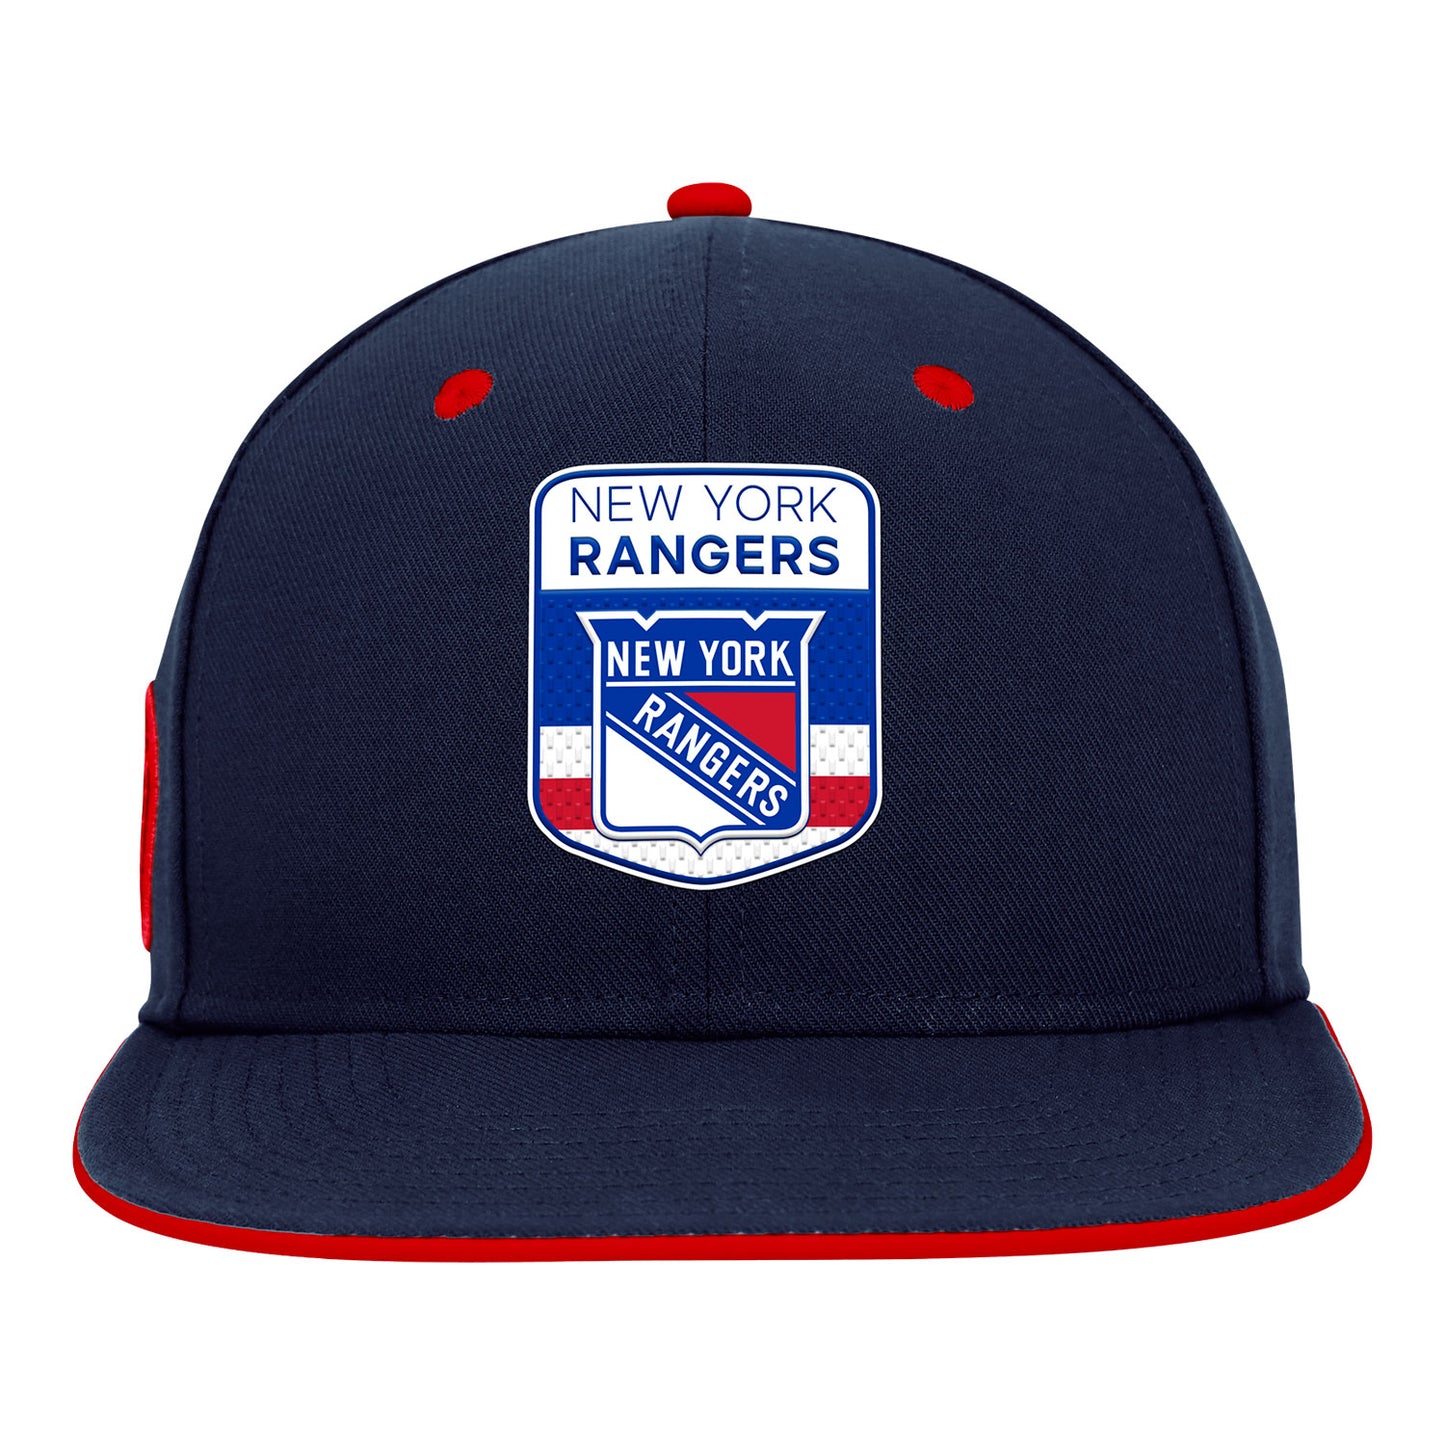 Fanatics Rangers 23 Authentic Pro Draft Snapback Hat - In Navy - Front View